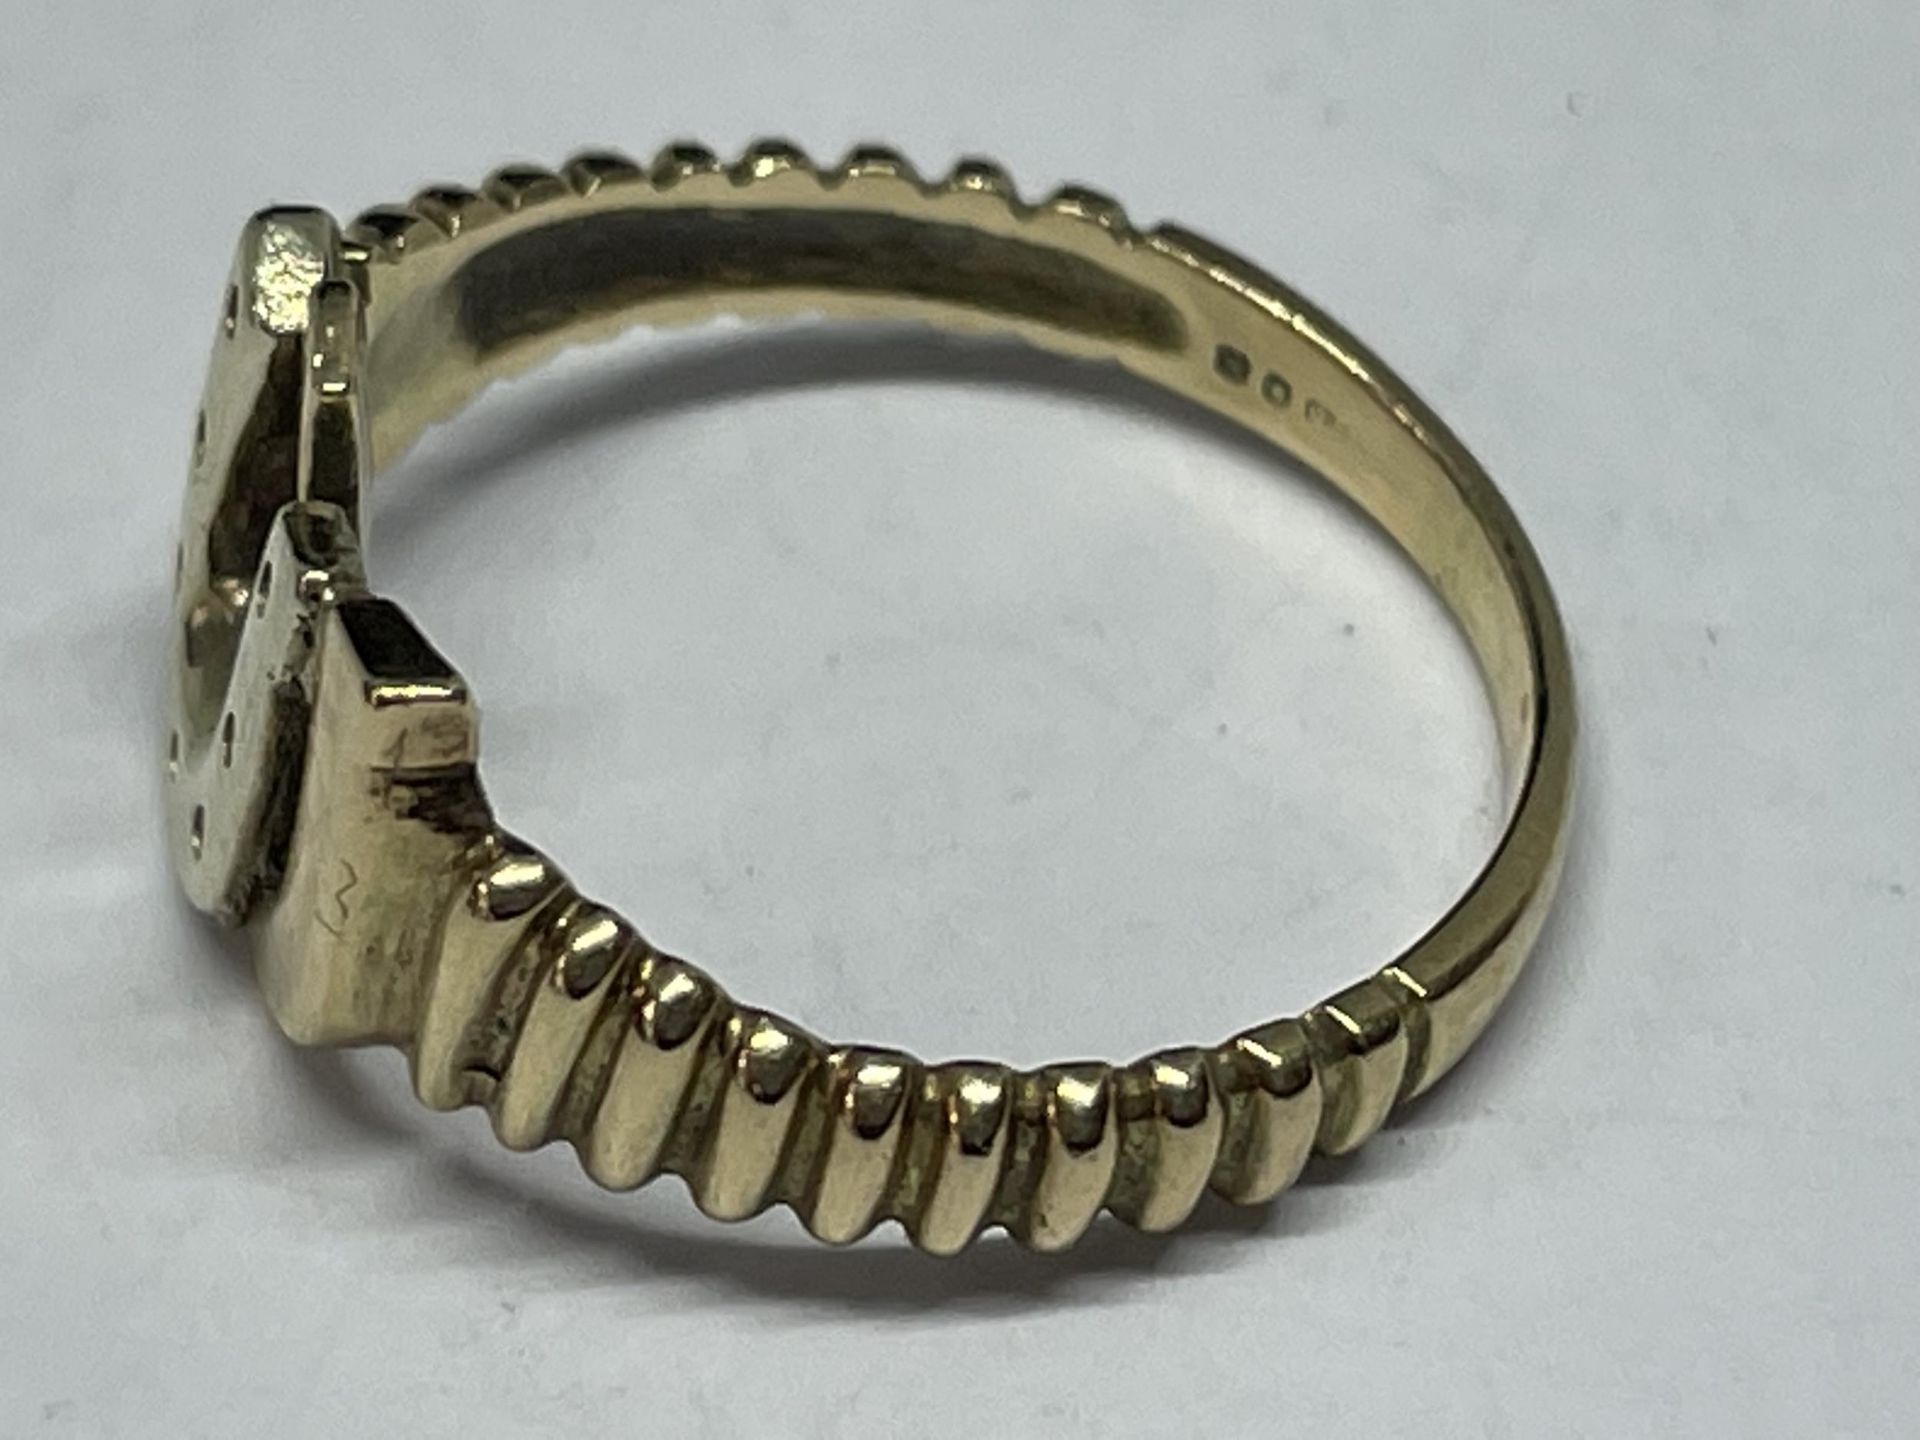 A 9 CARAT GOLD RING WITH HORSESHOE DESIGN GROSS WEIGHT 2.55 GRAMS SIZE M/N - Image 2 of 3